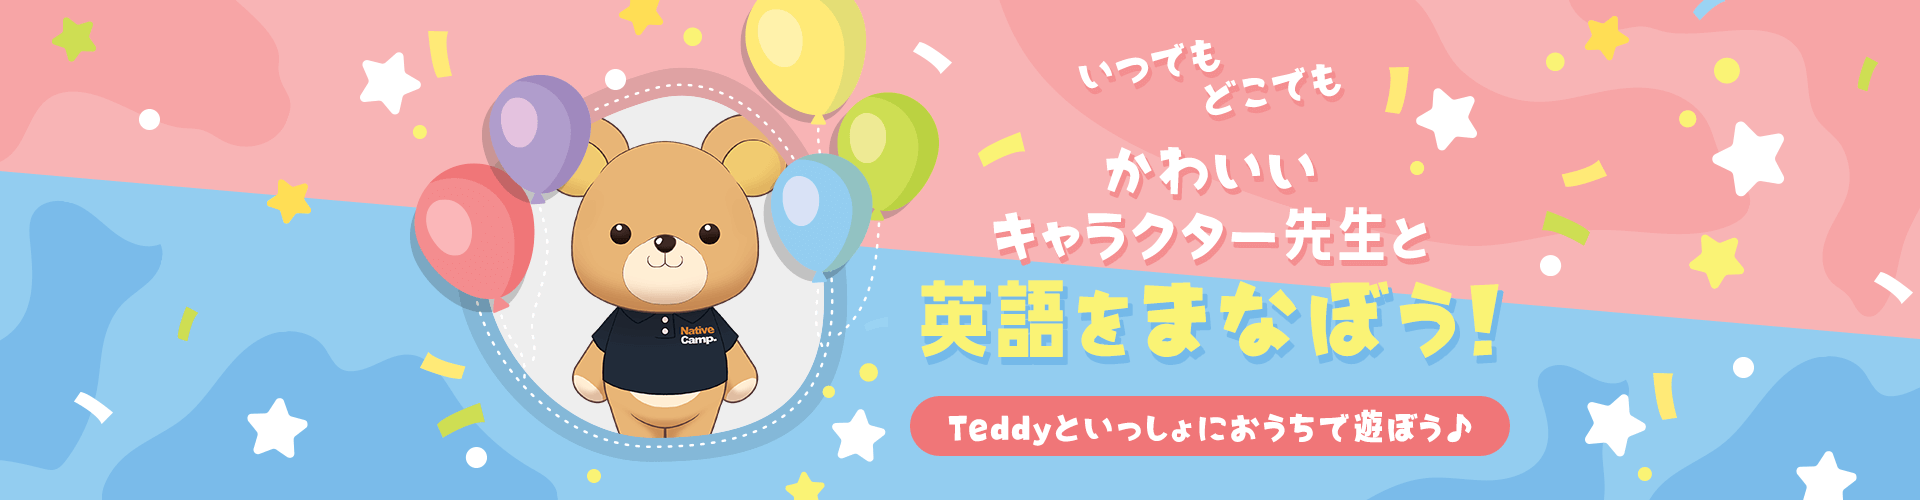 Learn English anytime, anywhere with a cute character teacher! Play with Teddy at home!